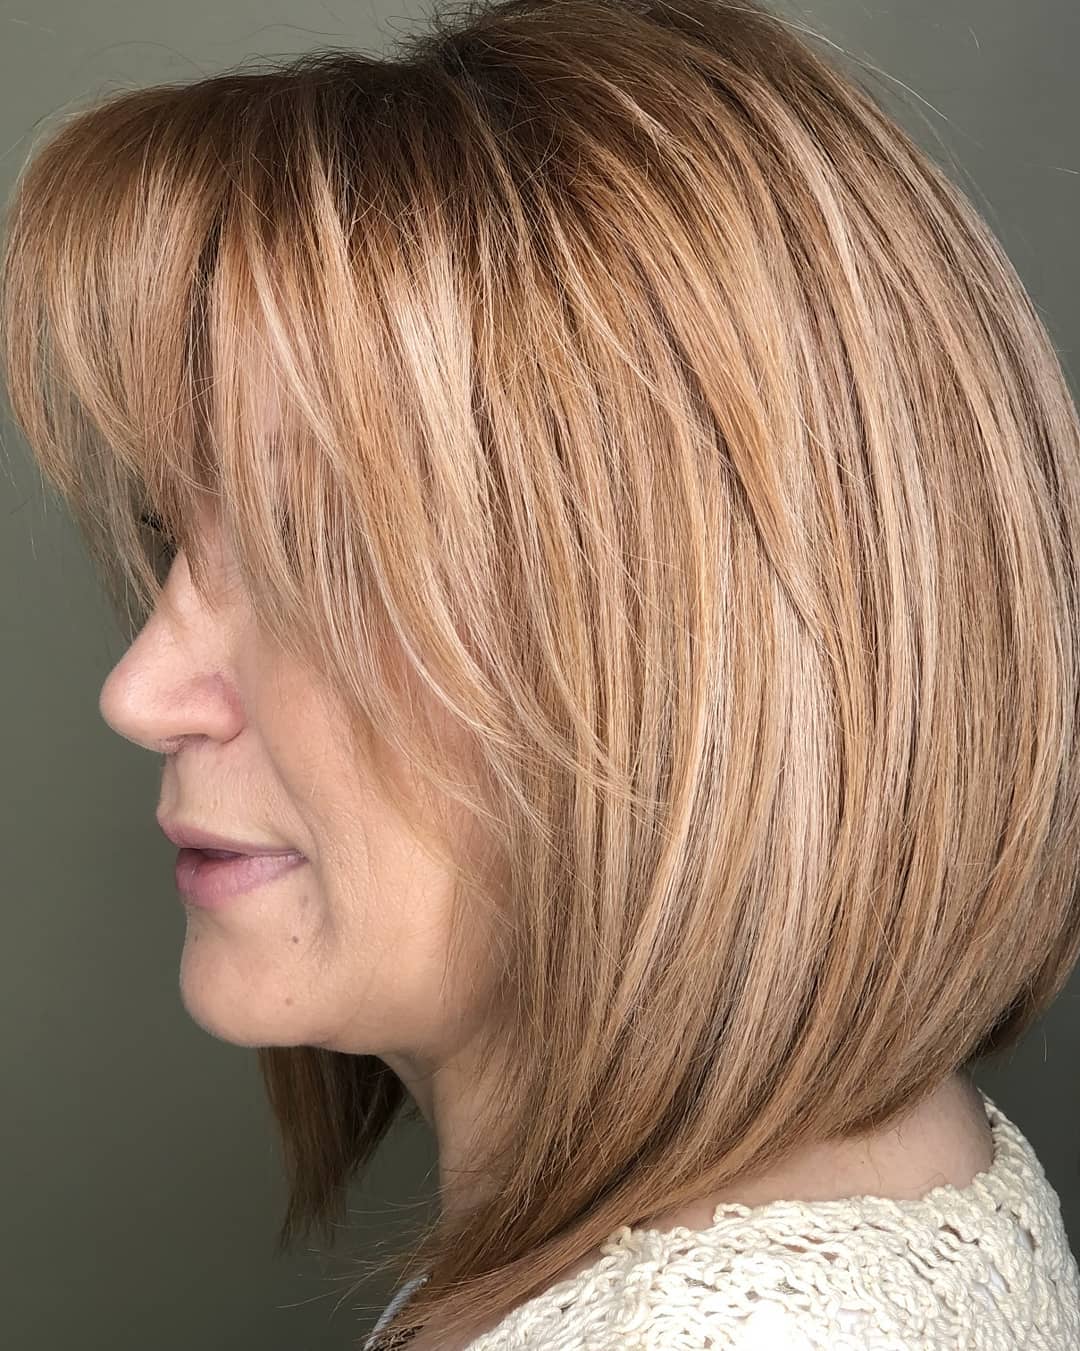 Medium bob for ladies over 60: 12 ideas that emphasize modern style